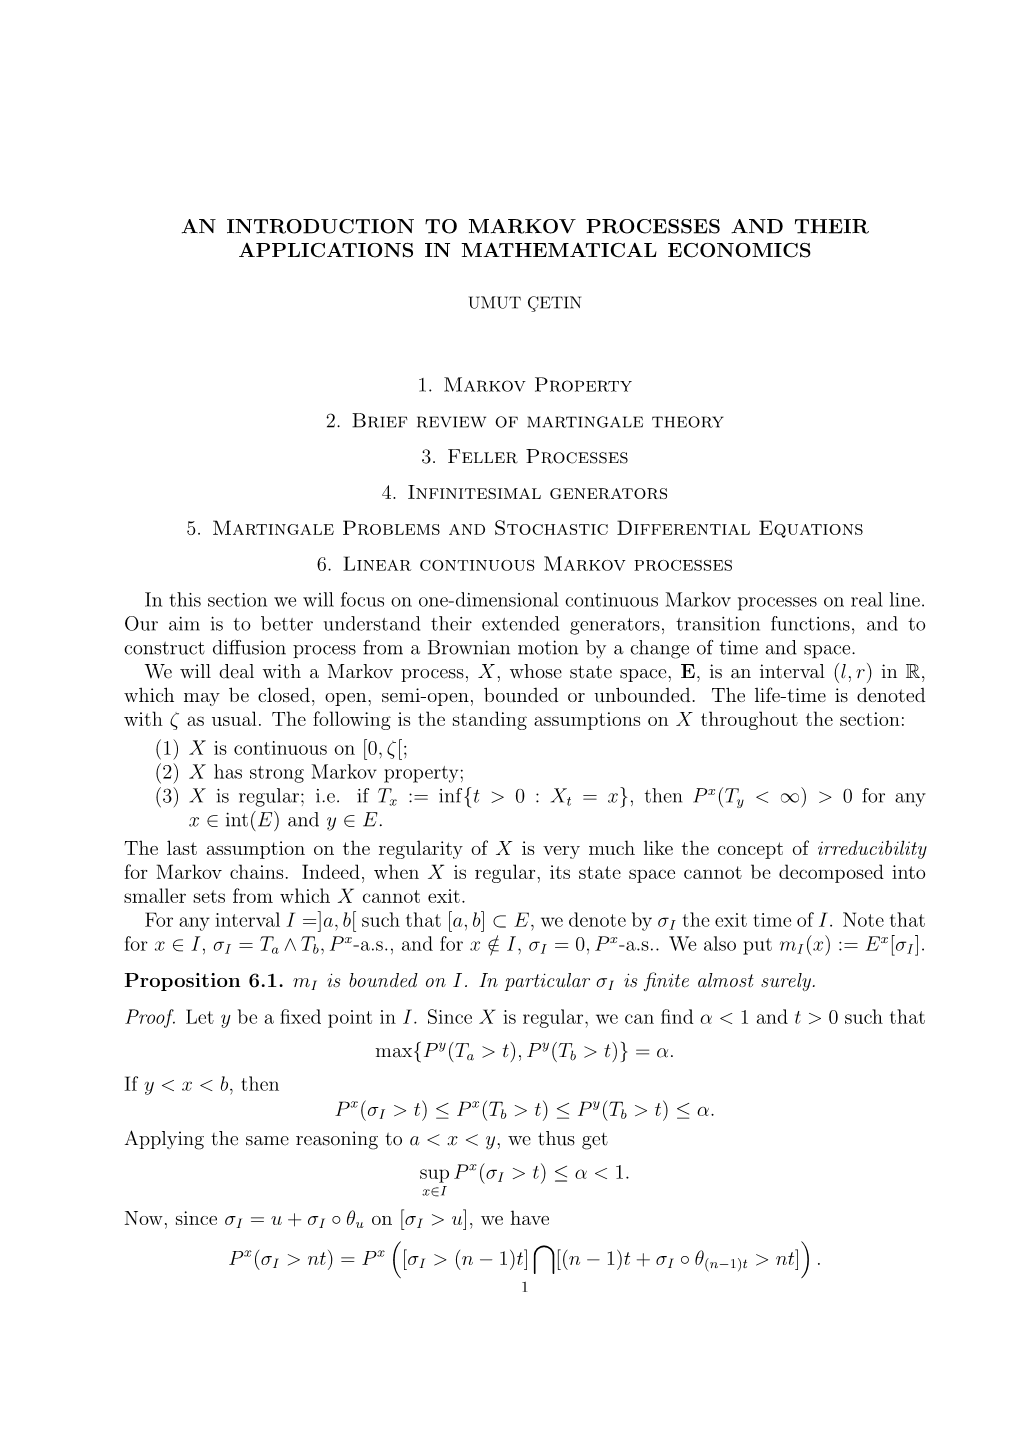 An Introduction to Markov Processes and Their Applications in Mathematical Economics